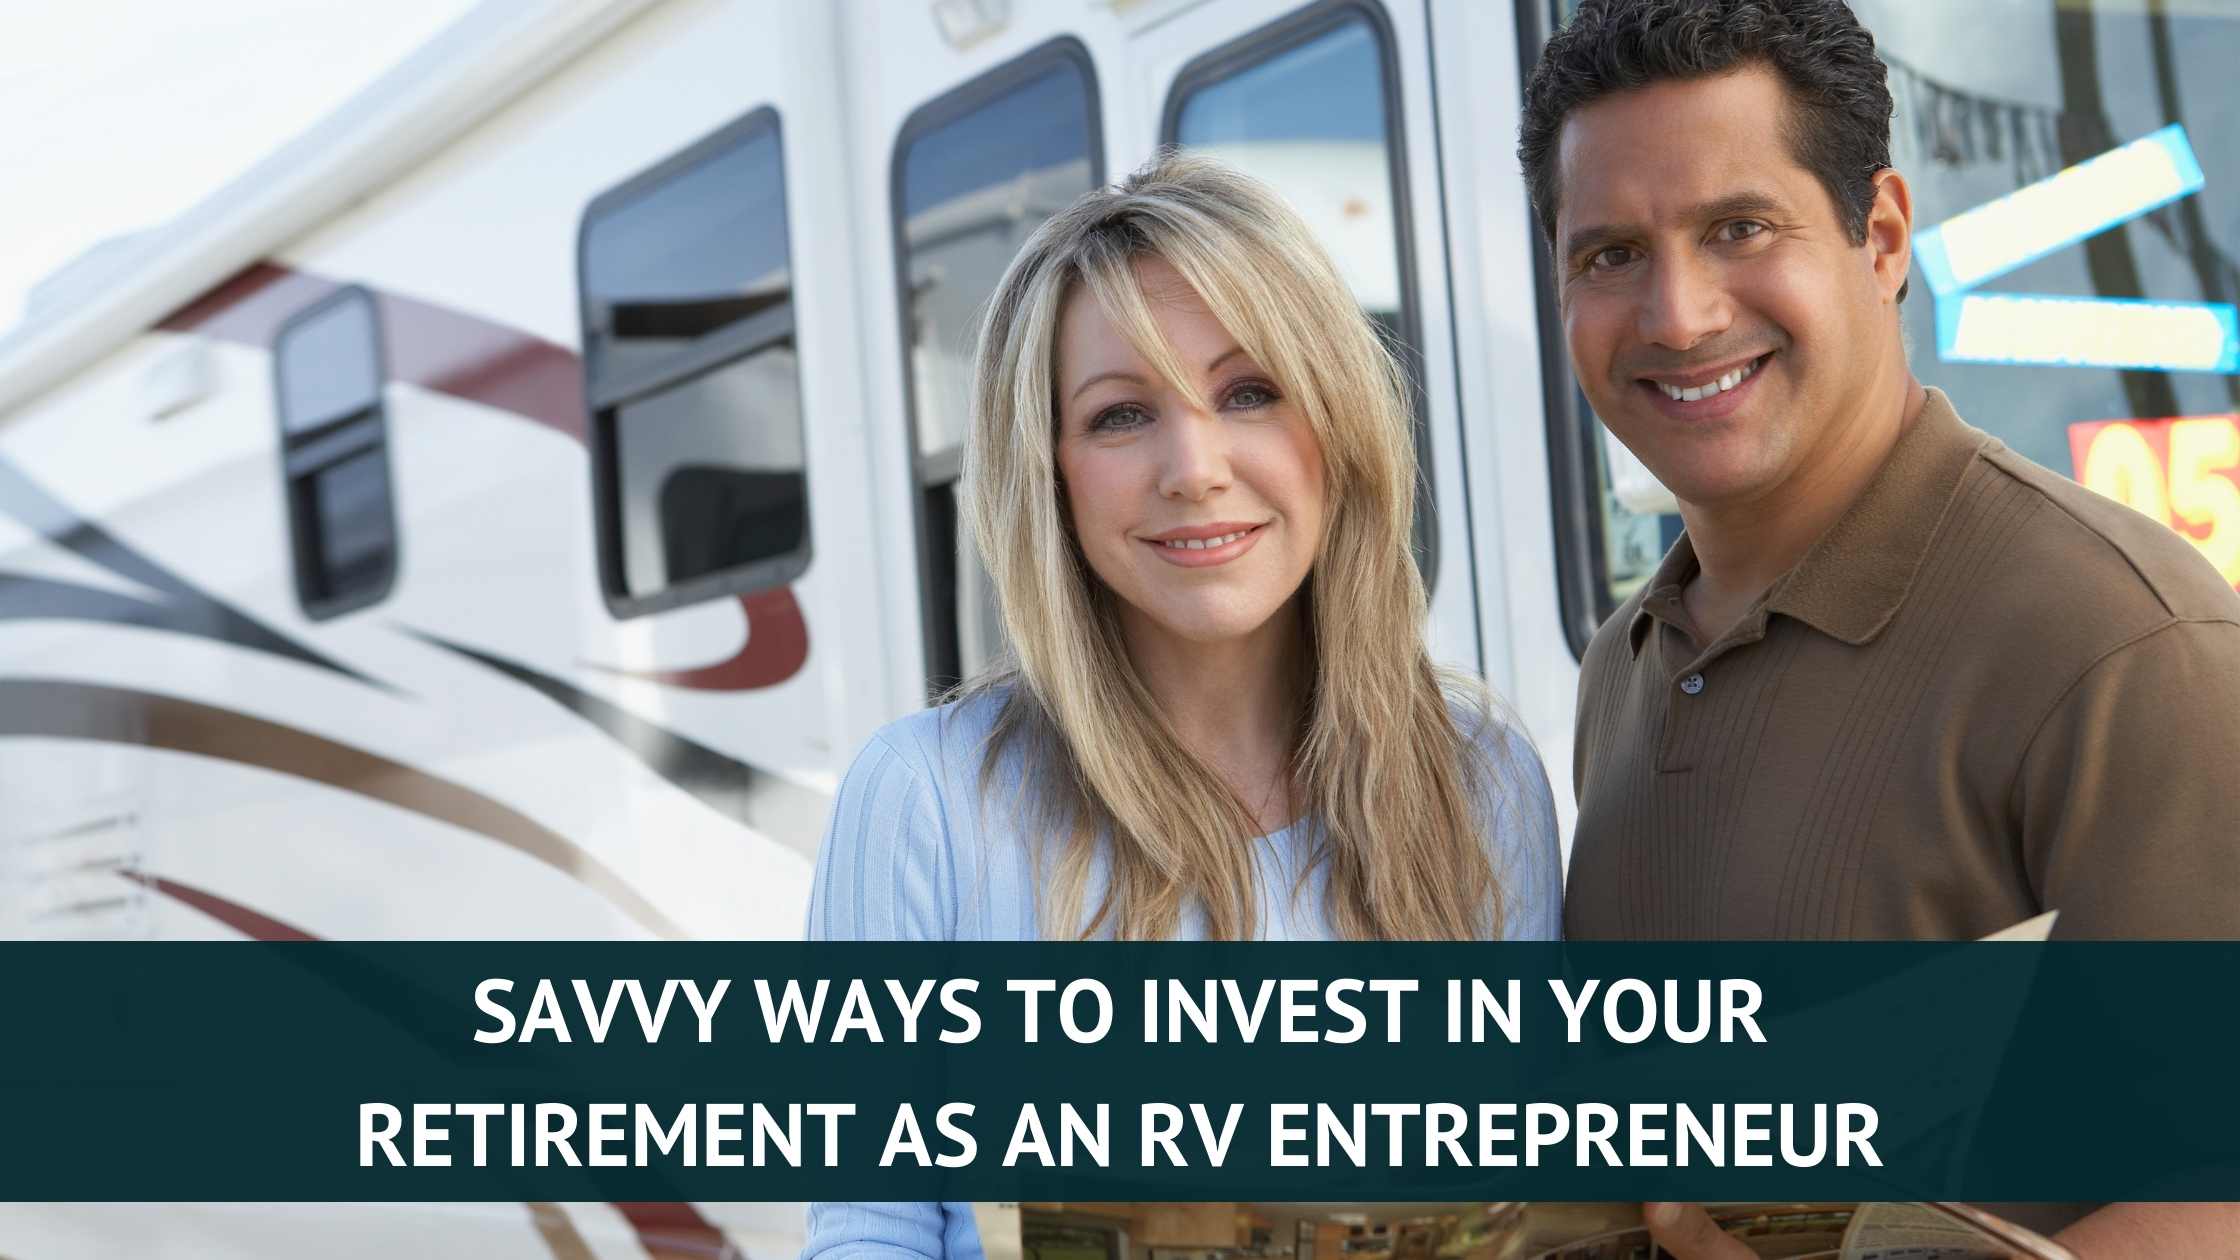 A man and woman standing in front of an RV with paperwork learning about ways to invest in your retirement as an RV entrepreneur